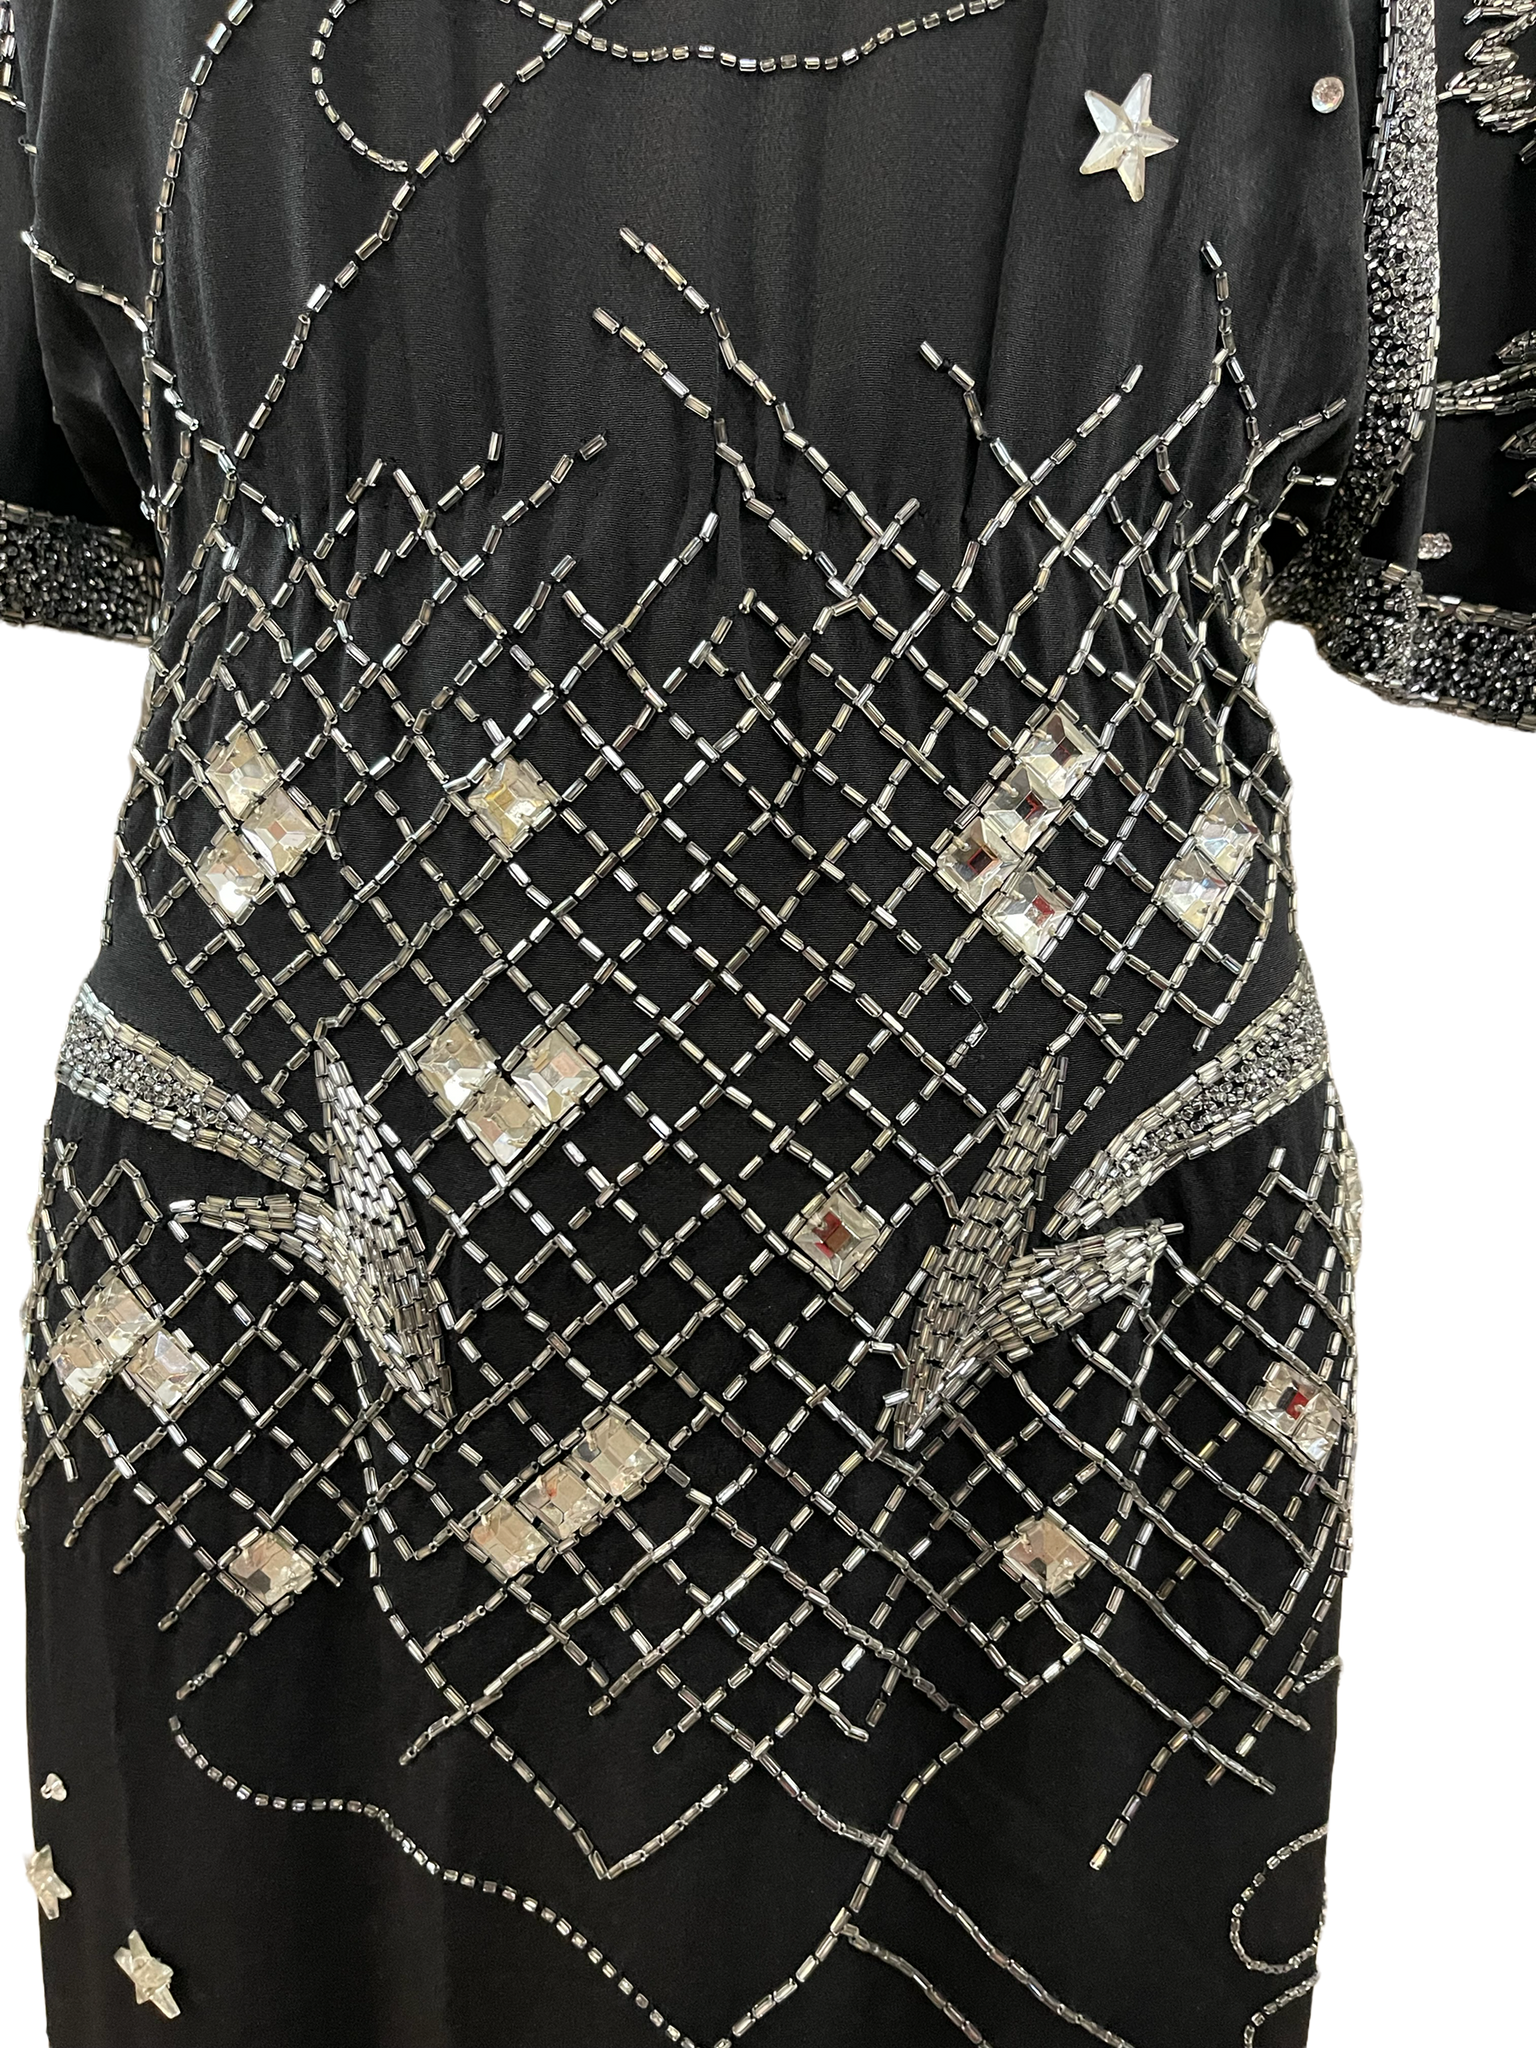 Fabrice 80s Black Beaded Cocktail Dress with Stars DETAIL 6 of 7